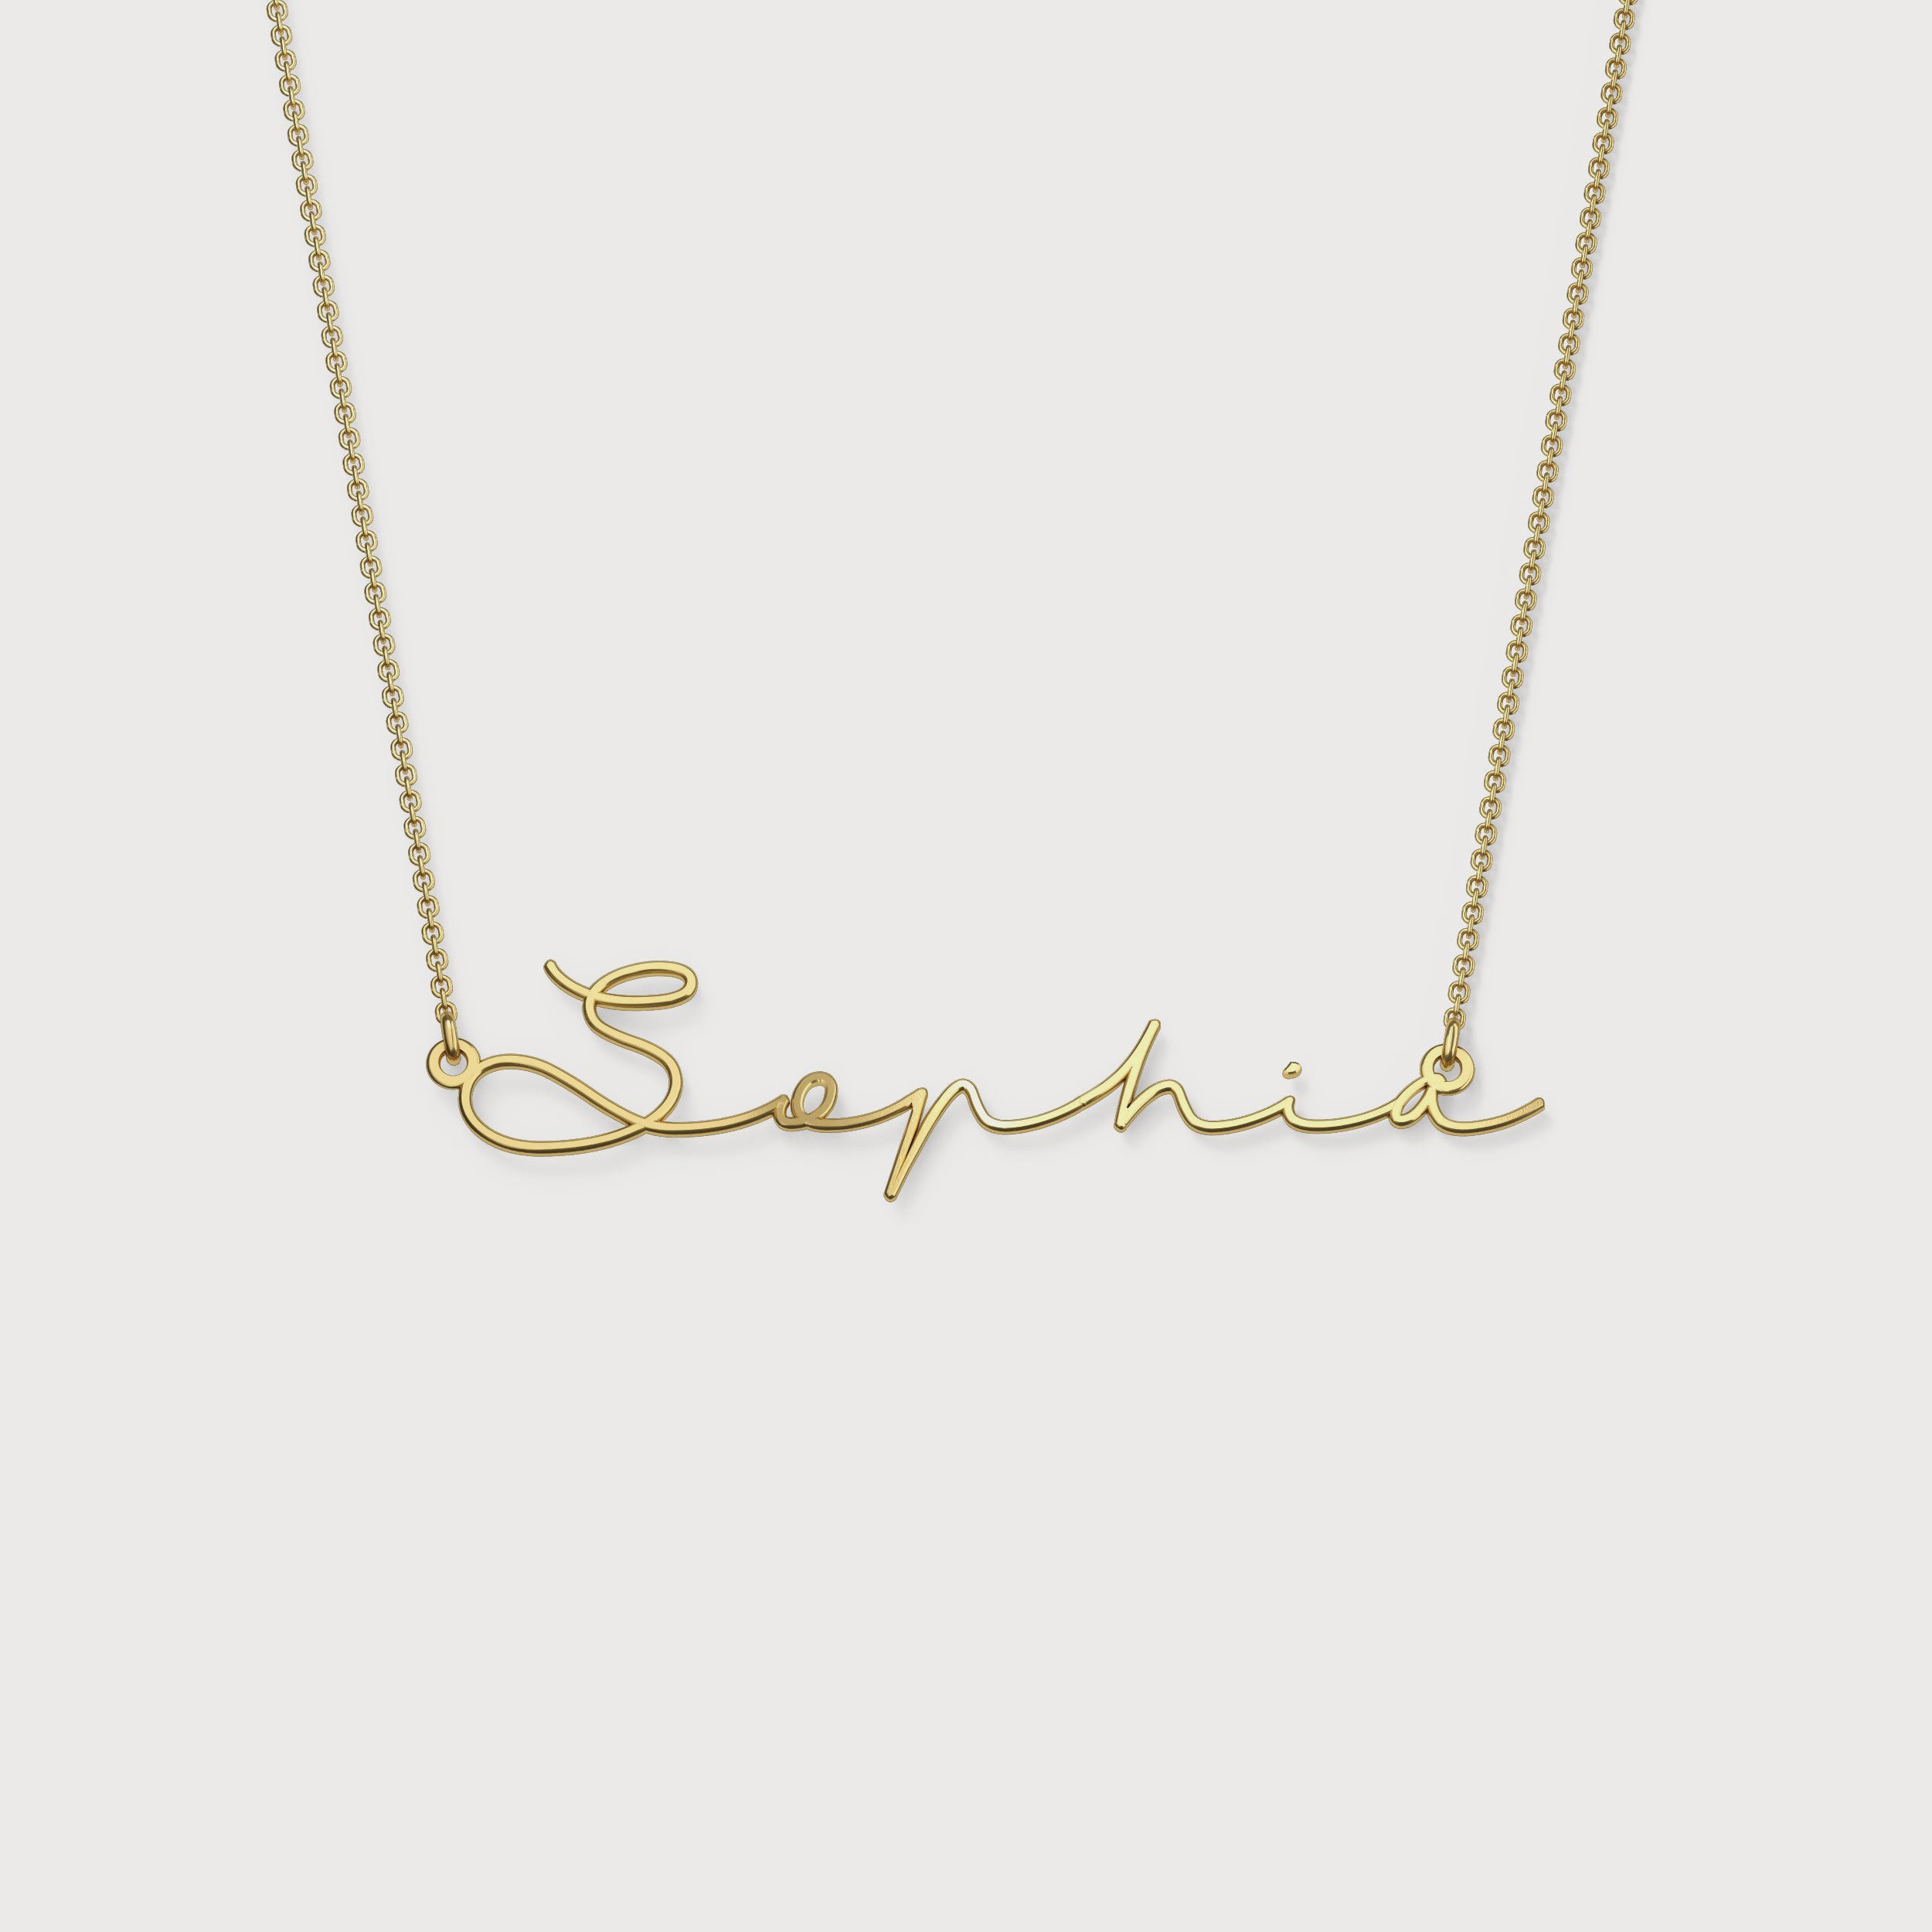 Selenichast mon amour name necklace